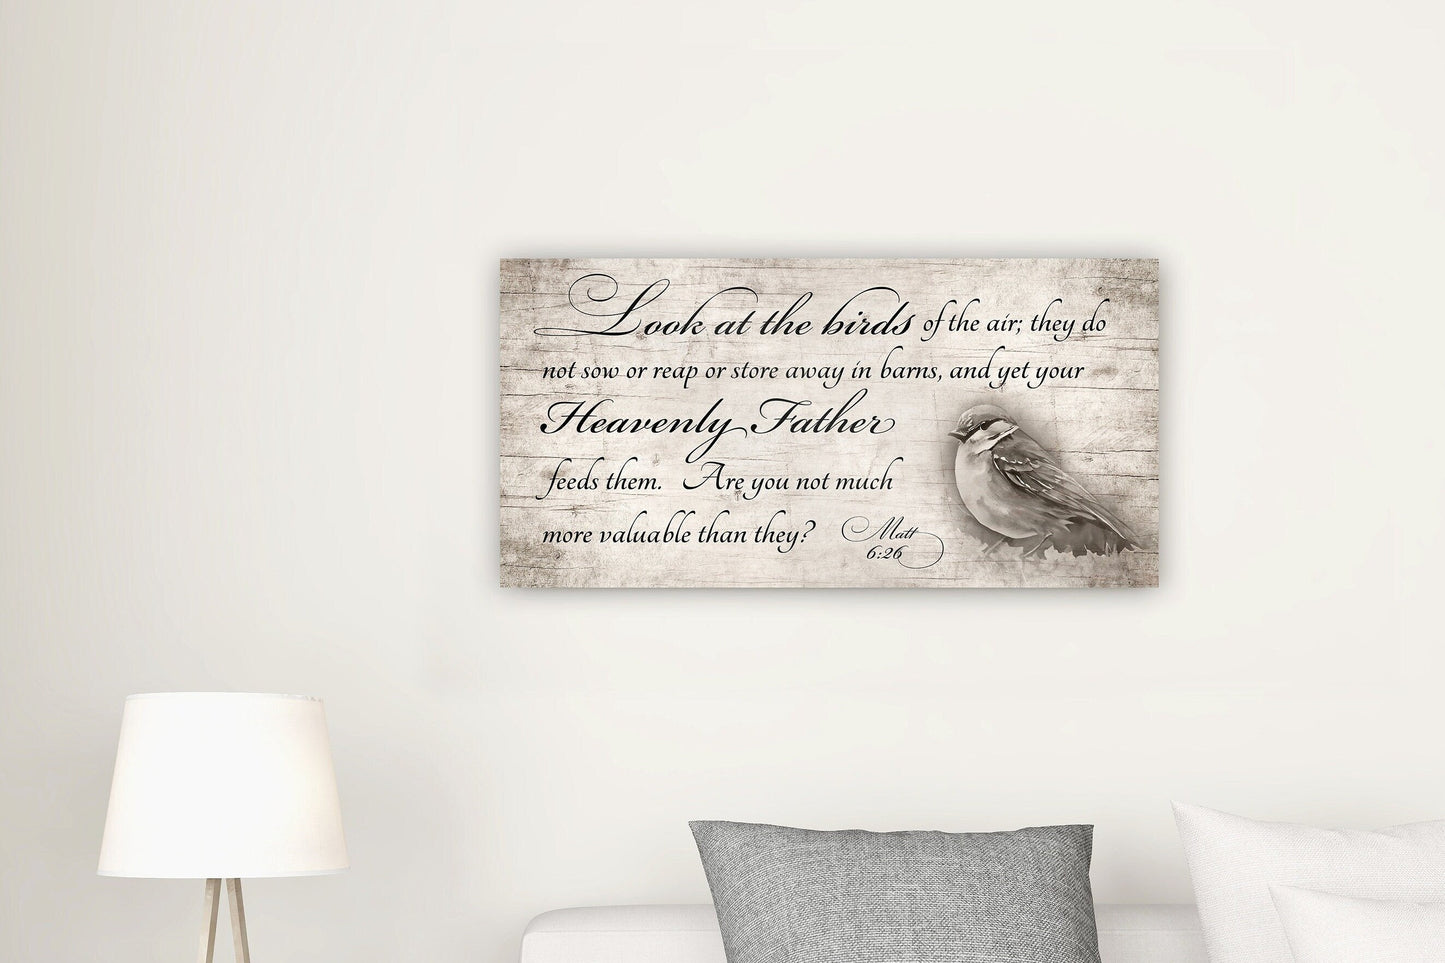 Look at the birds, Large Wood Scripture Art, Rustic Wood Wall Decor, Religious art, CottageCore, Religious Wall Hanging, Bible Verse